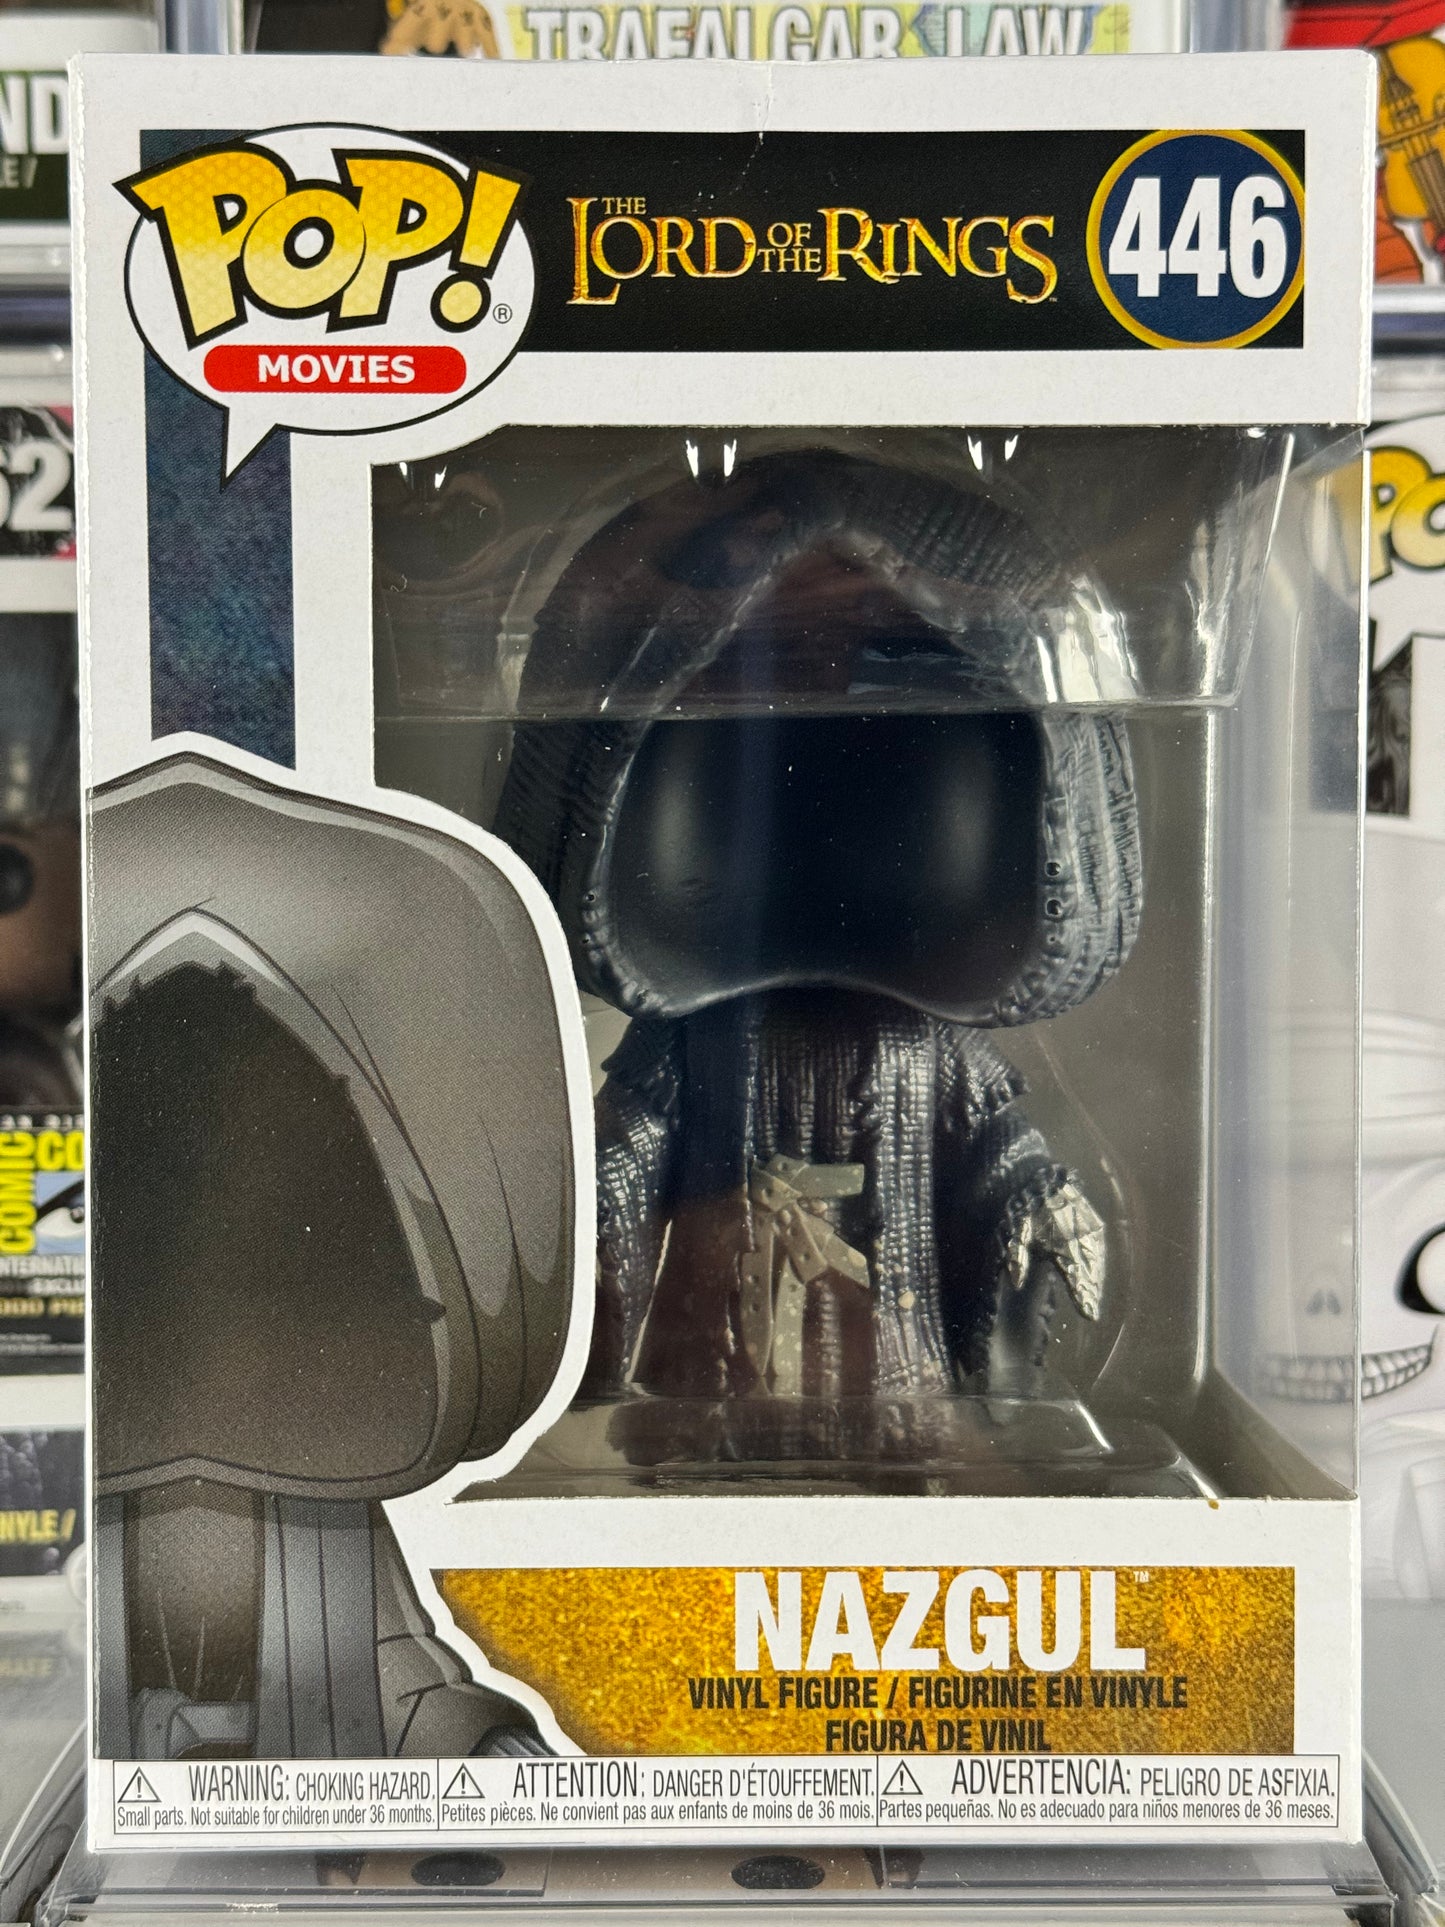 The Lord of the Rings - Nazgul (446) Vaulted